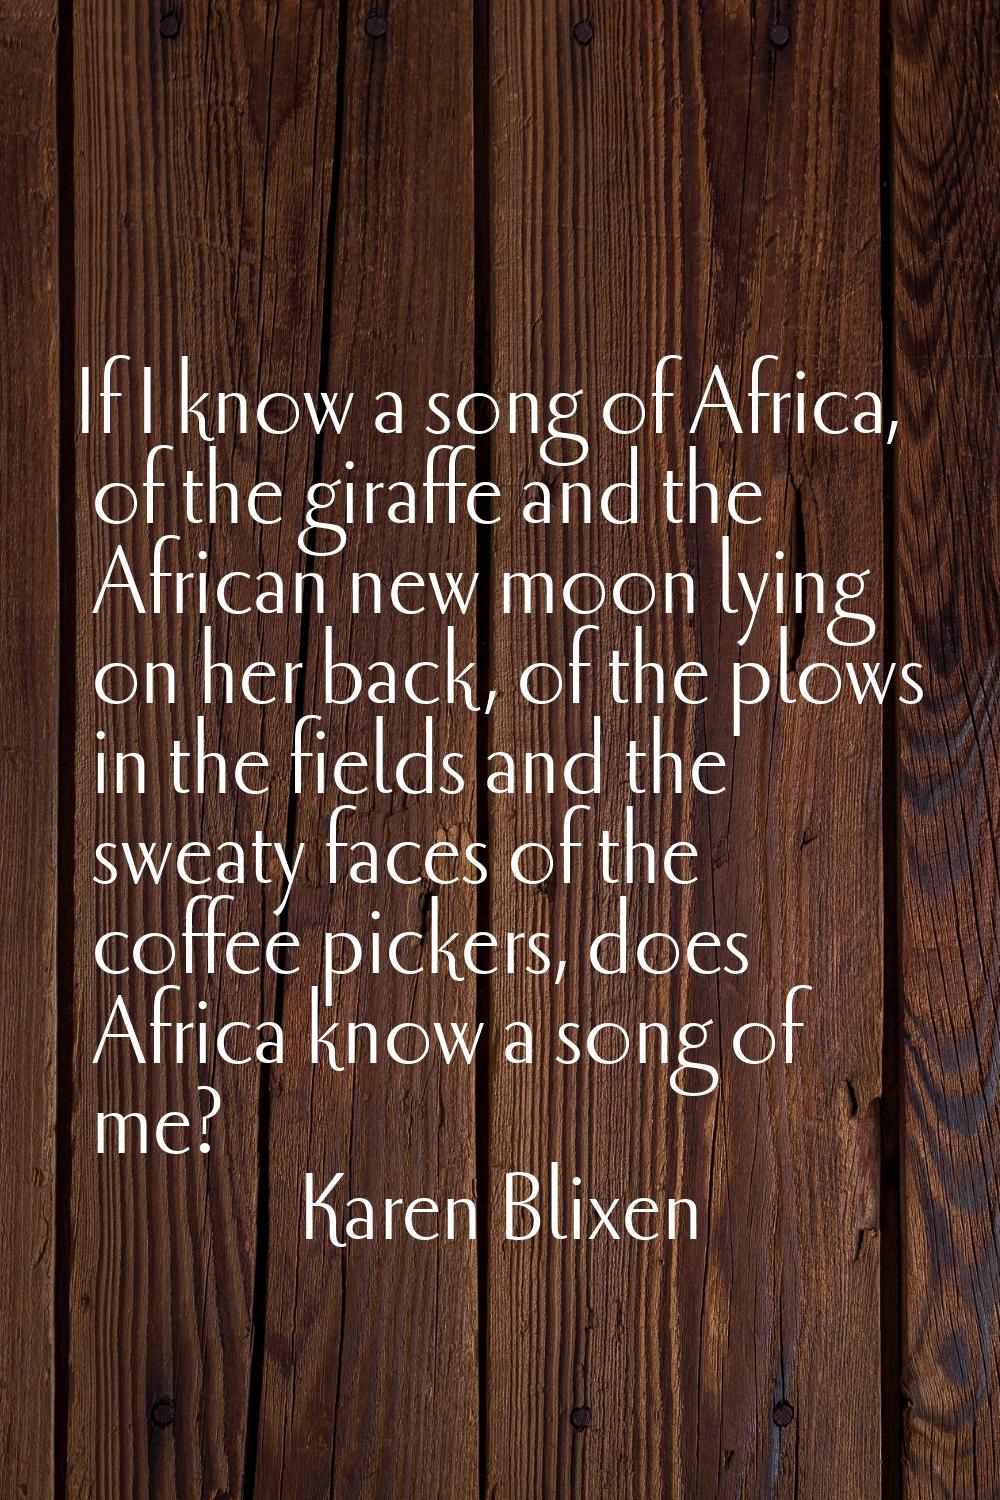 If I know a song of Africa, of the giraffe and the African new moon lying on her back, of the plows